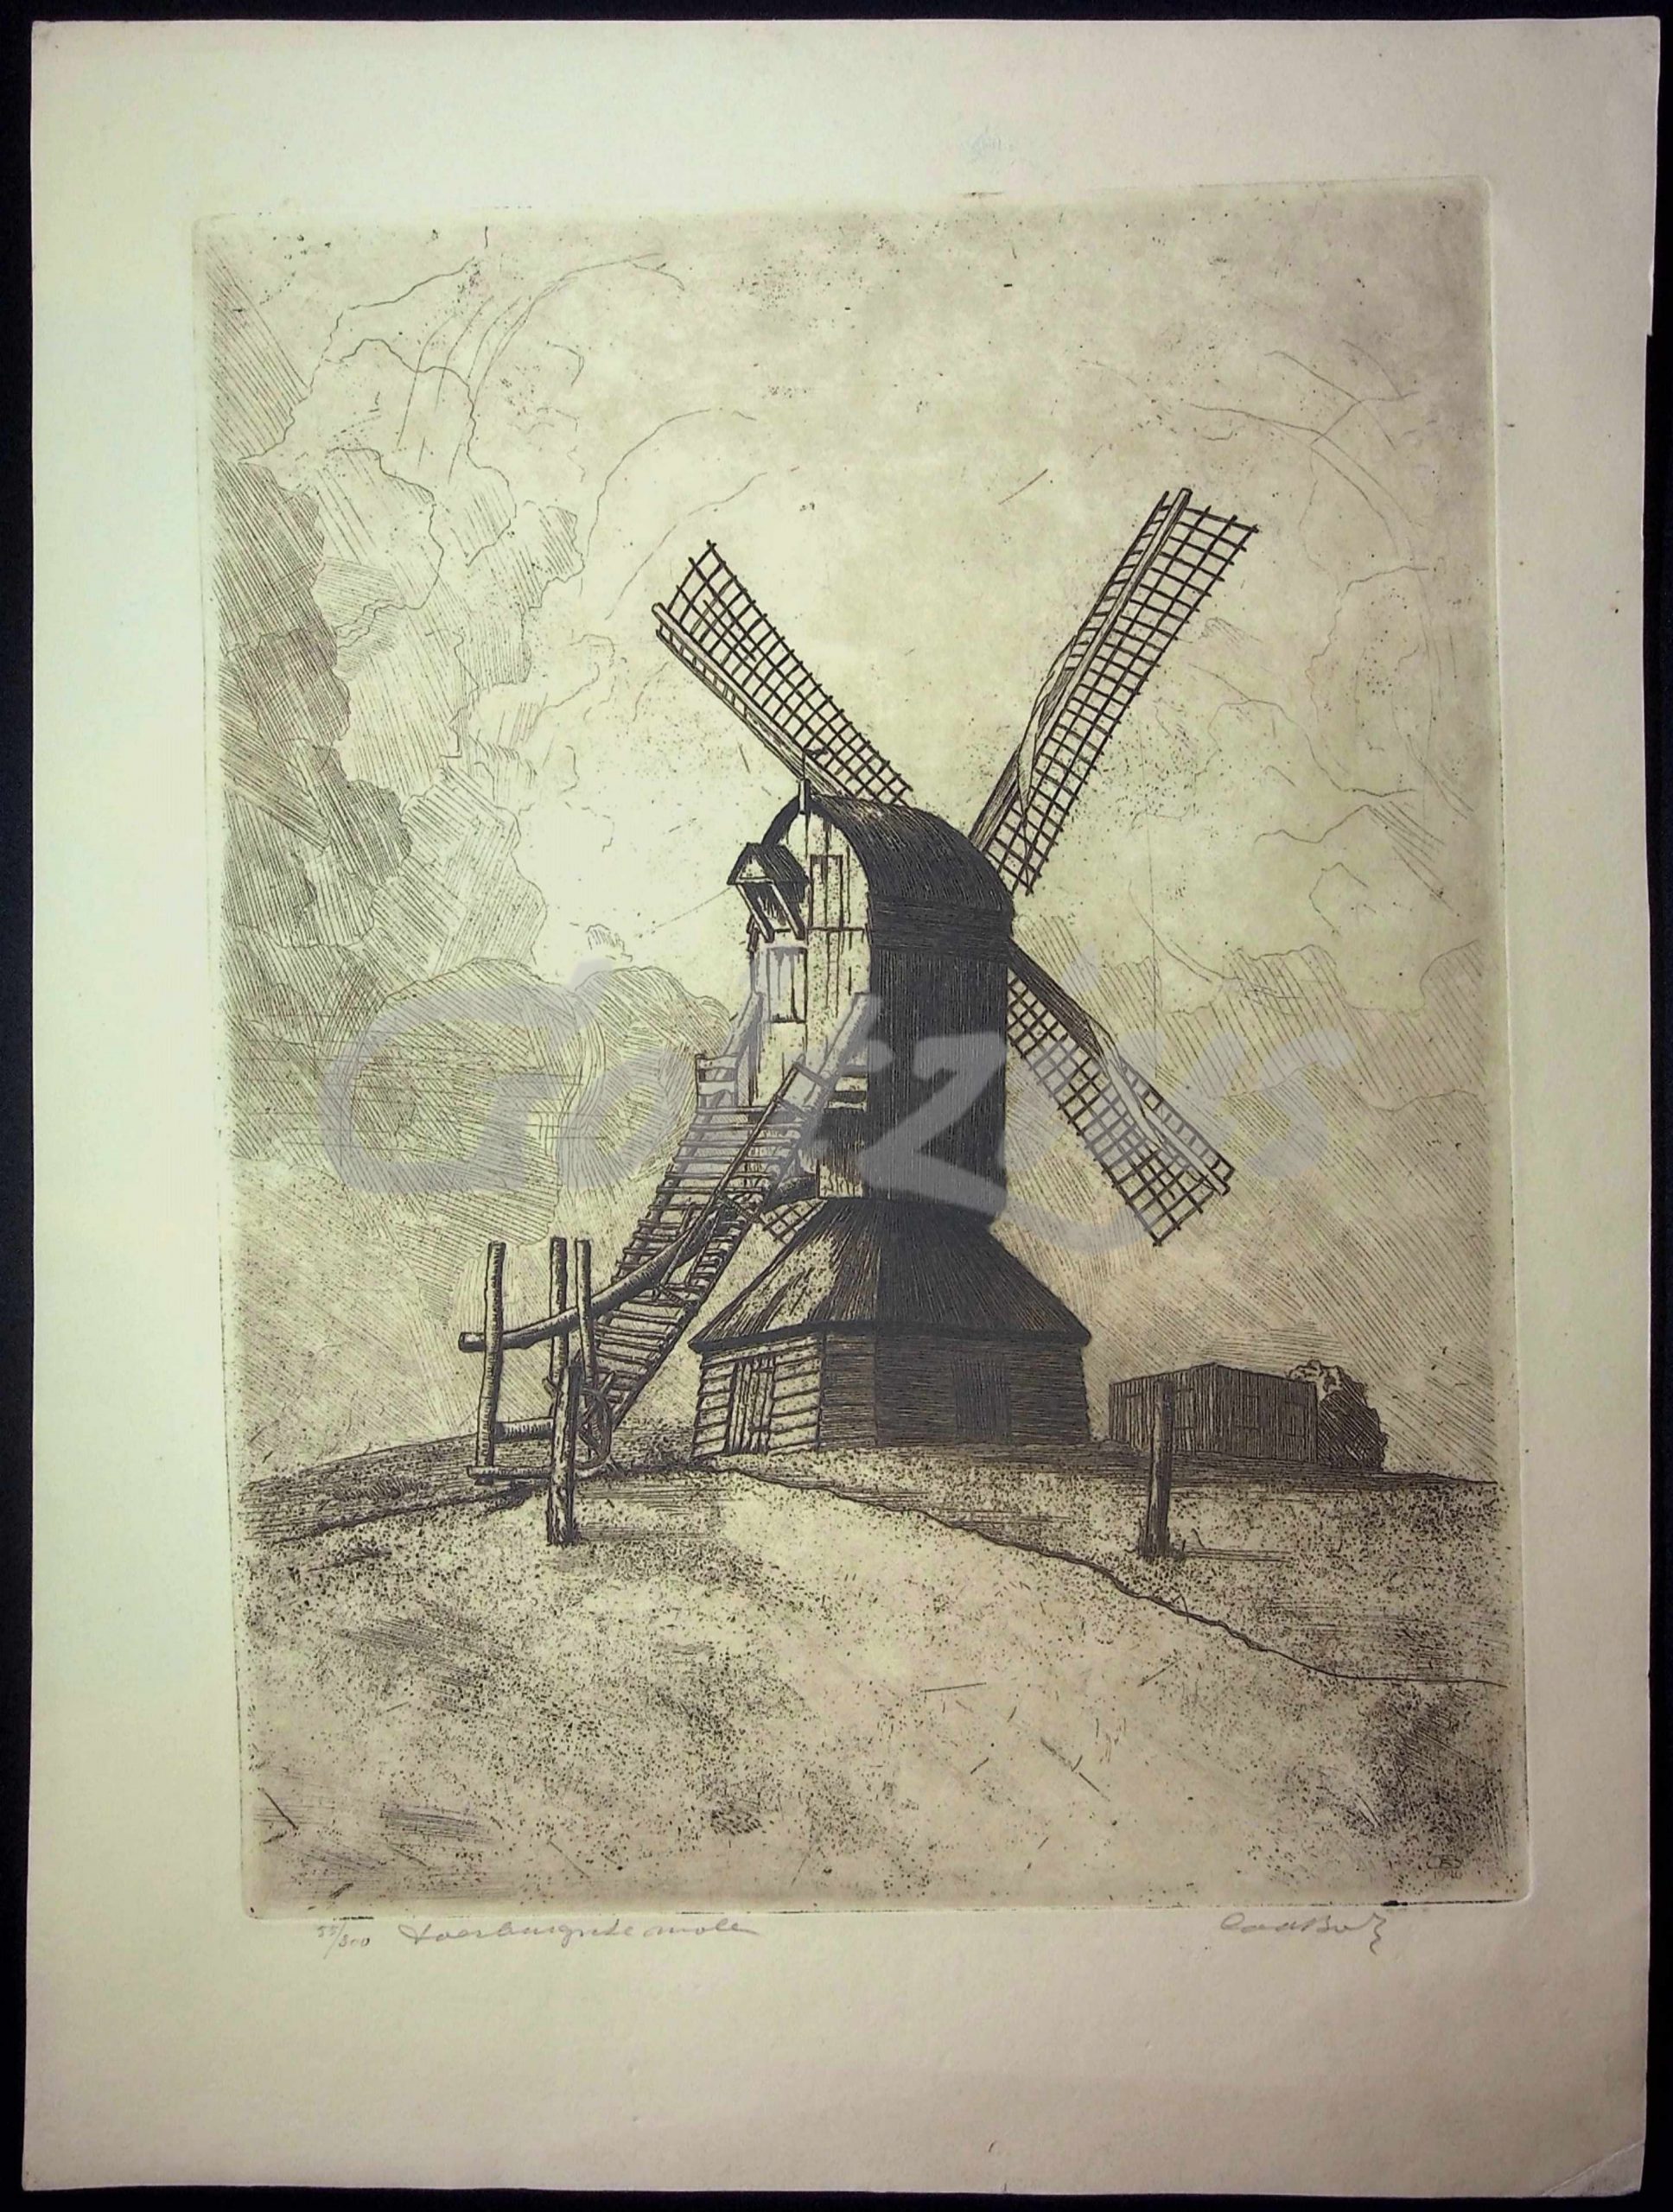 UNKNOWN (SIGNED IN PENCIL BUT UNREADABLE), Windmill in landscape, 1940